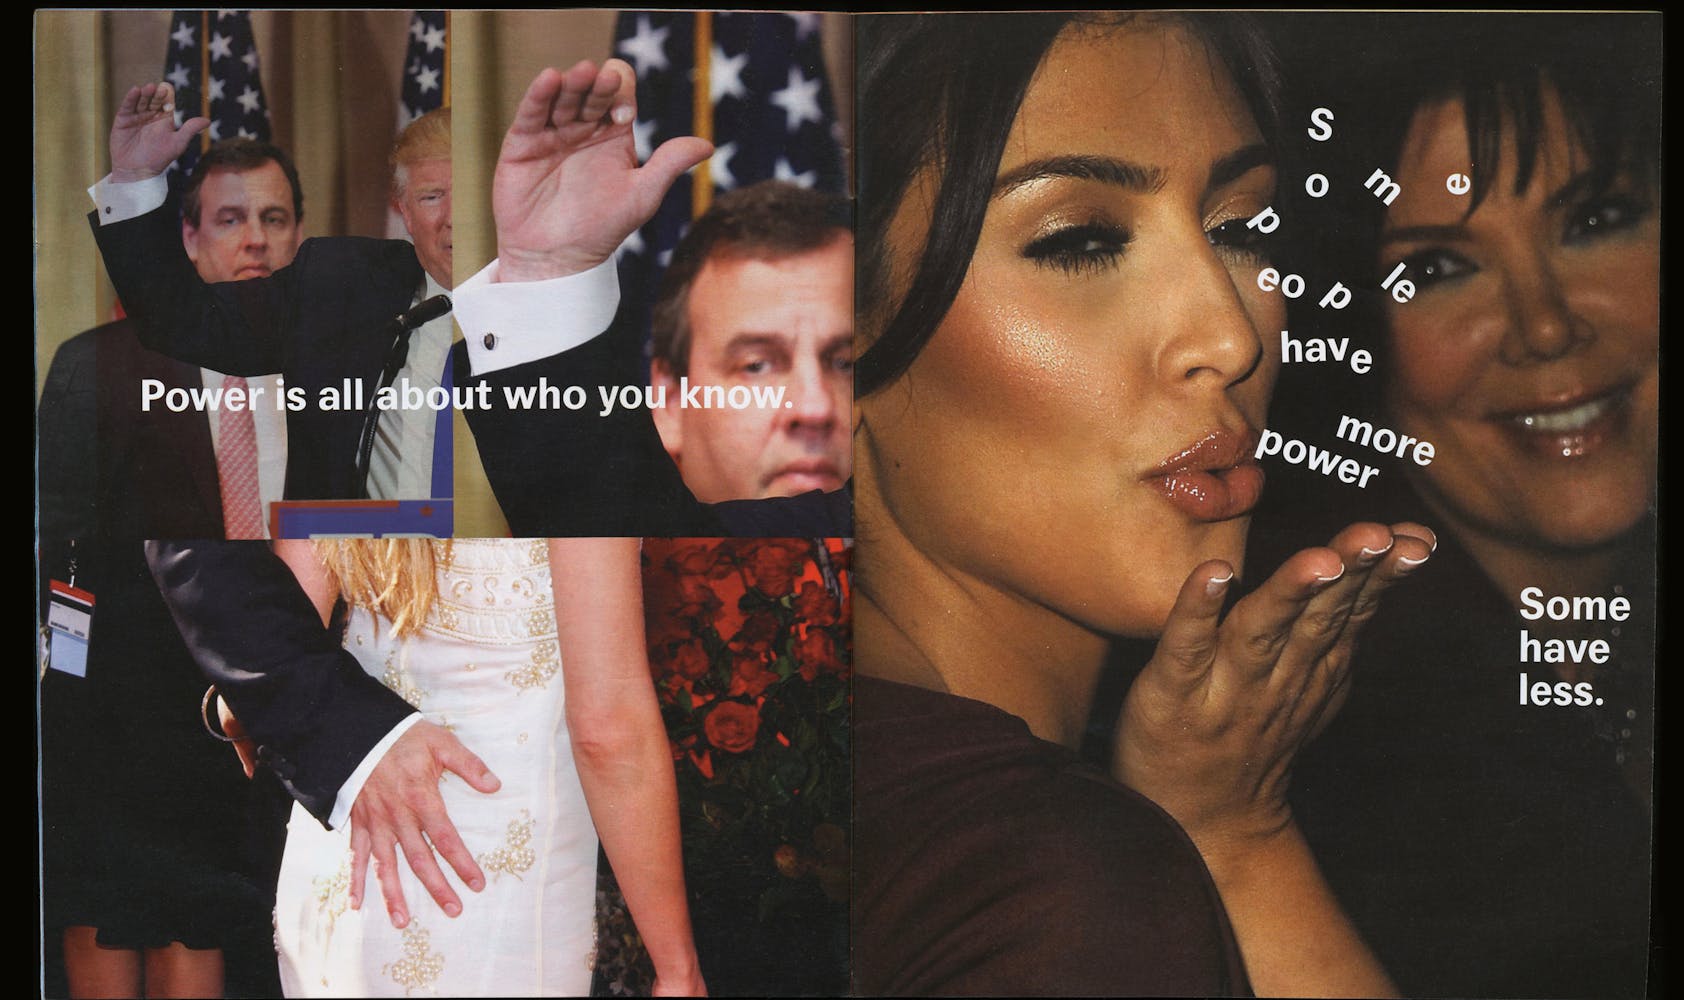 Image collage featuring images of politicians and celebrities juxtaposed with the words "Power is all about who you know. Some people have more power and some have less."